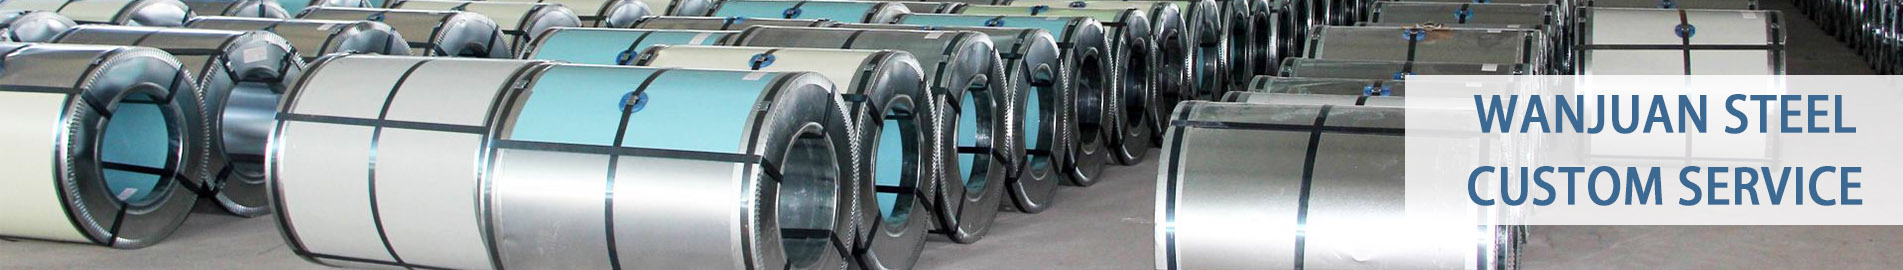 steel coil supplier, steel coil factory